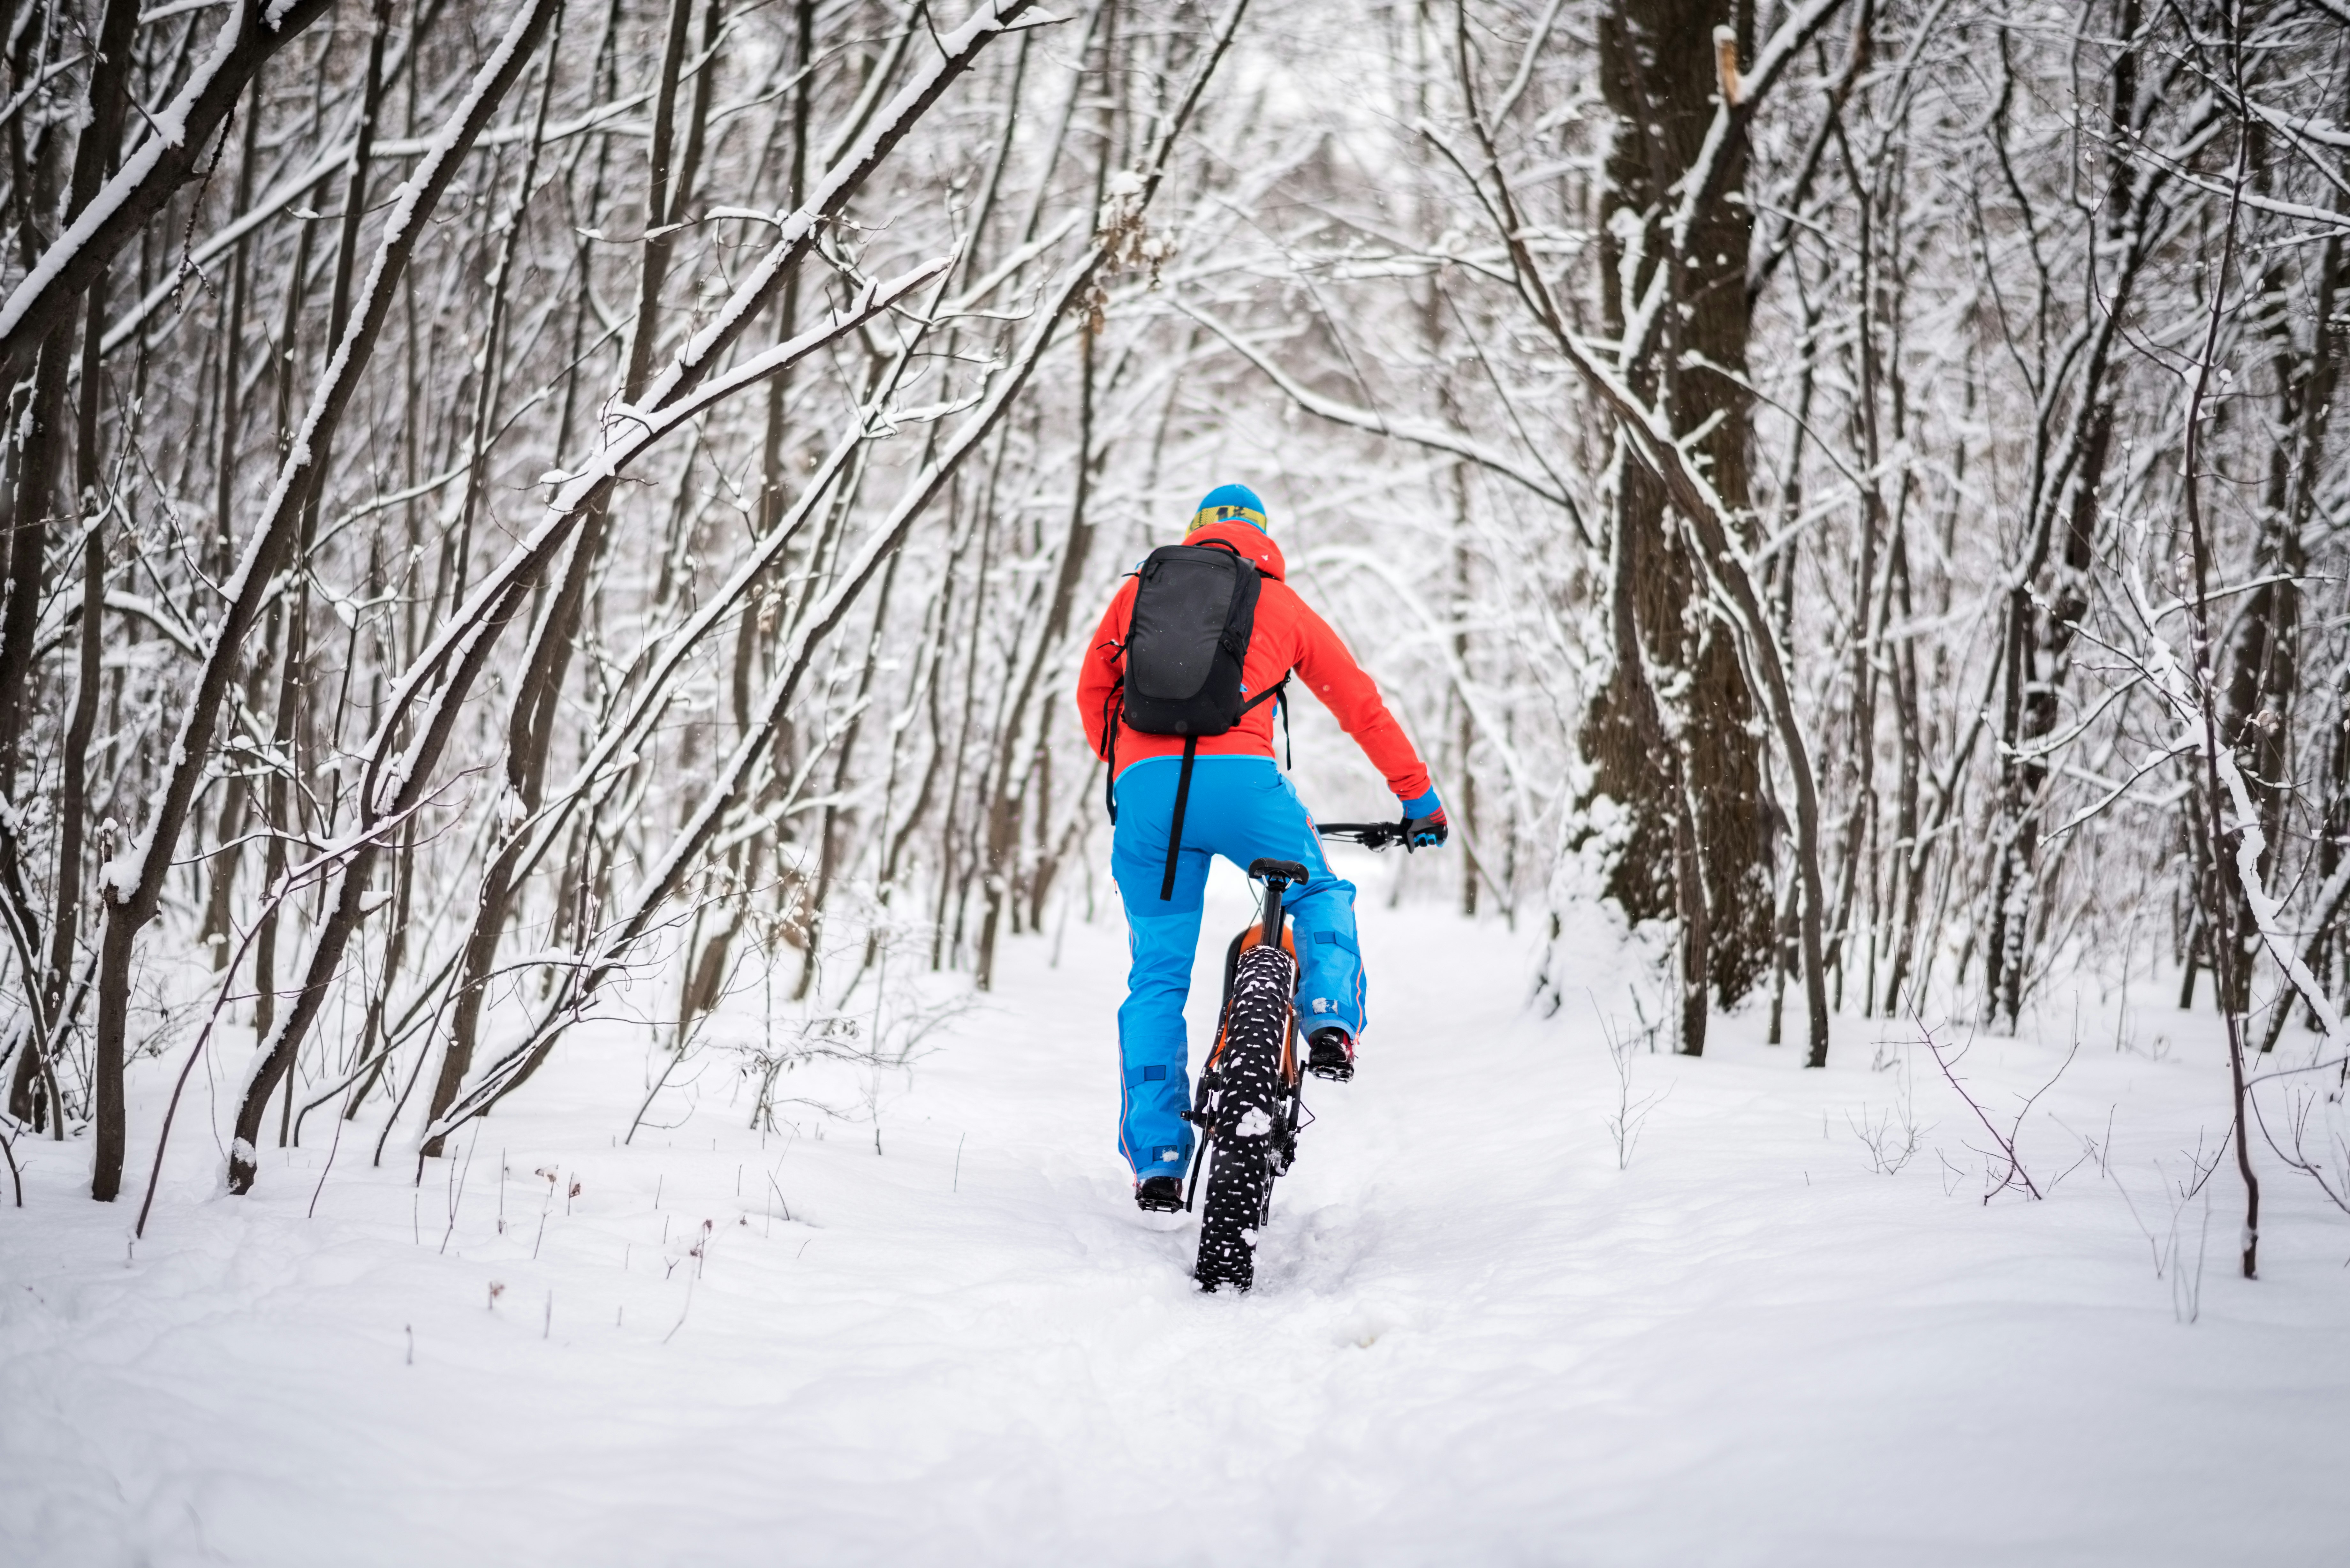 A man in bright blue snow pants, a red ski jacket, a black daypack, and a blue knit cap bikes through a new-growth forest blanketed with snow on a black bike with fat balloon tires designed for the powder.